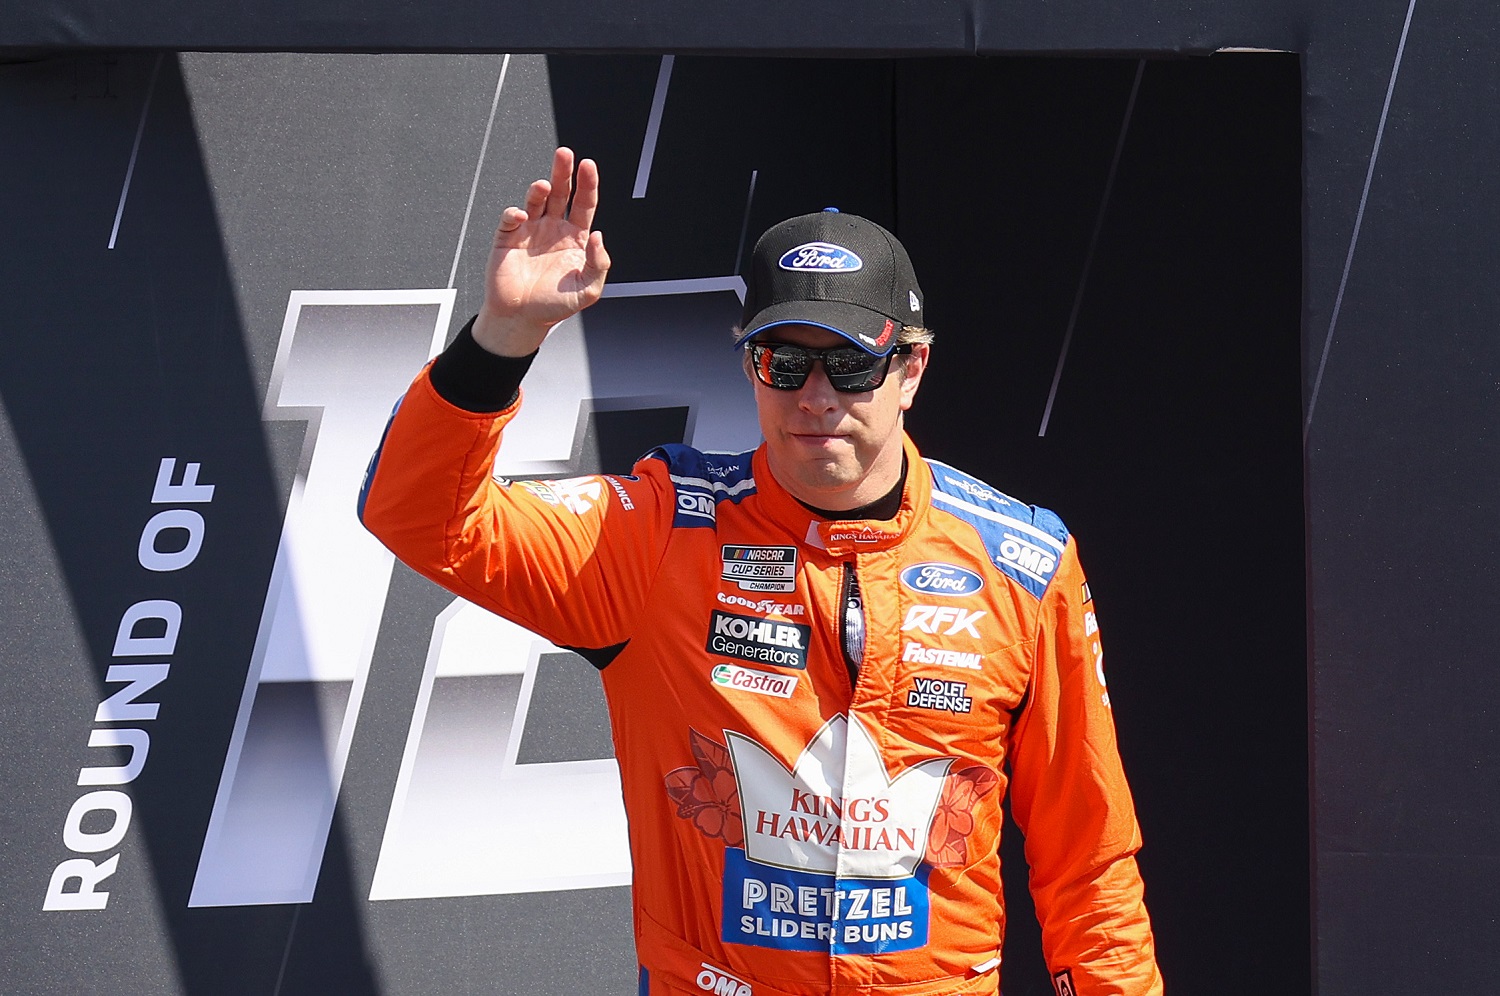 Brad Keselowski waves to fans during driver intros at the NASCAR Cup Series Auto Trader EchoPark Automotive 500 at Texas Motor Speedway on Sept. 25, 2022. | James Gilbert/Getty Images